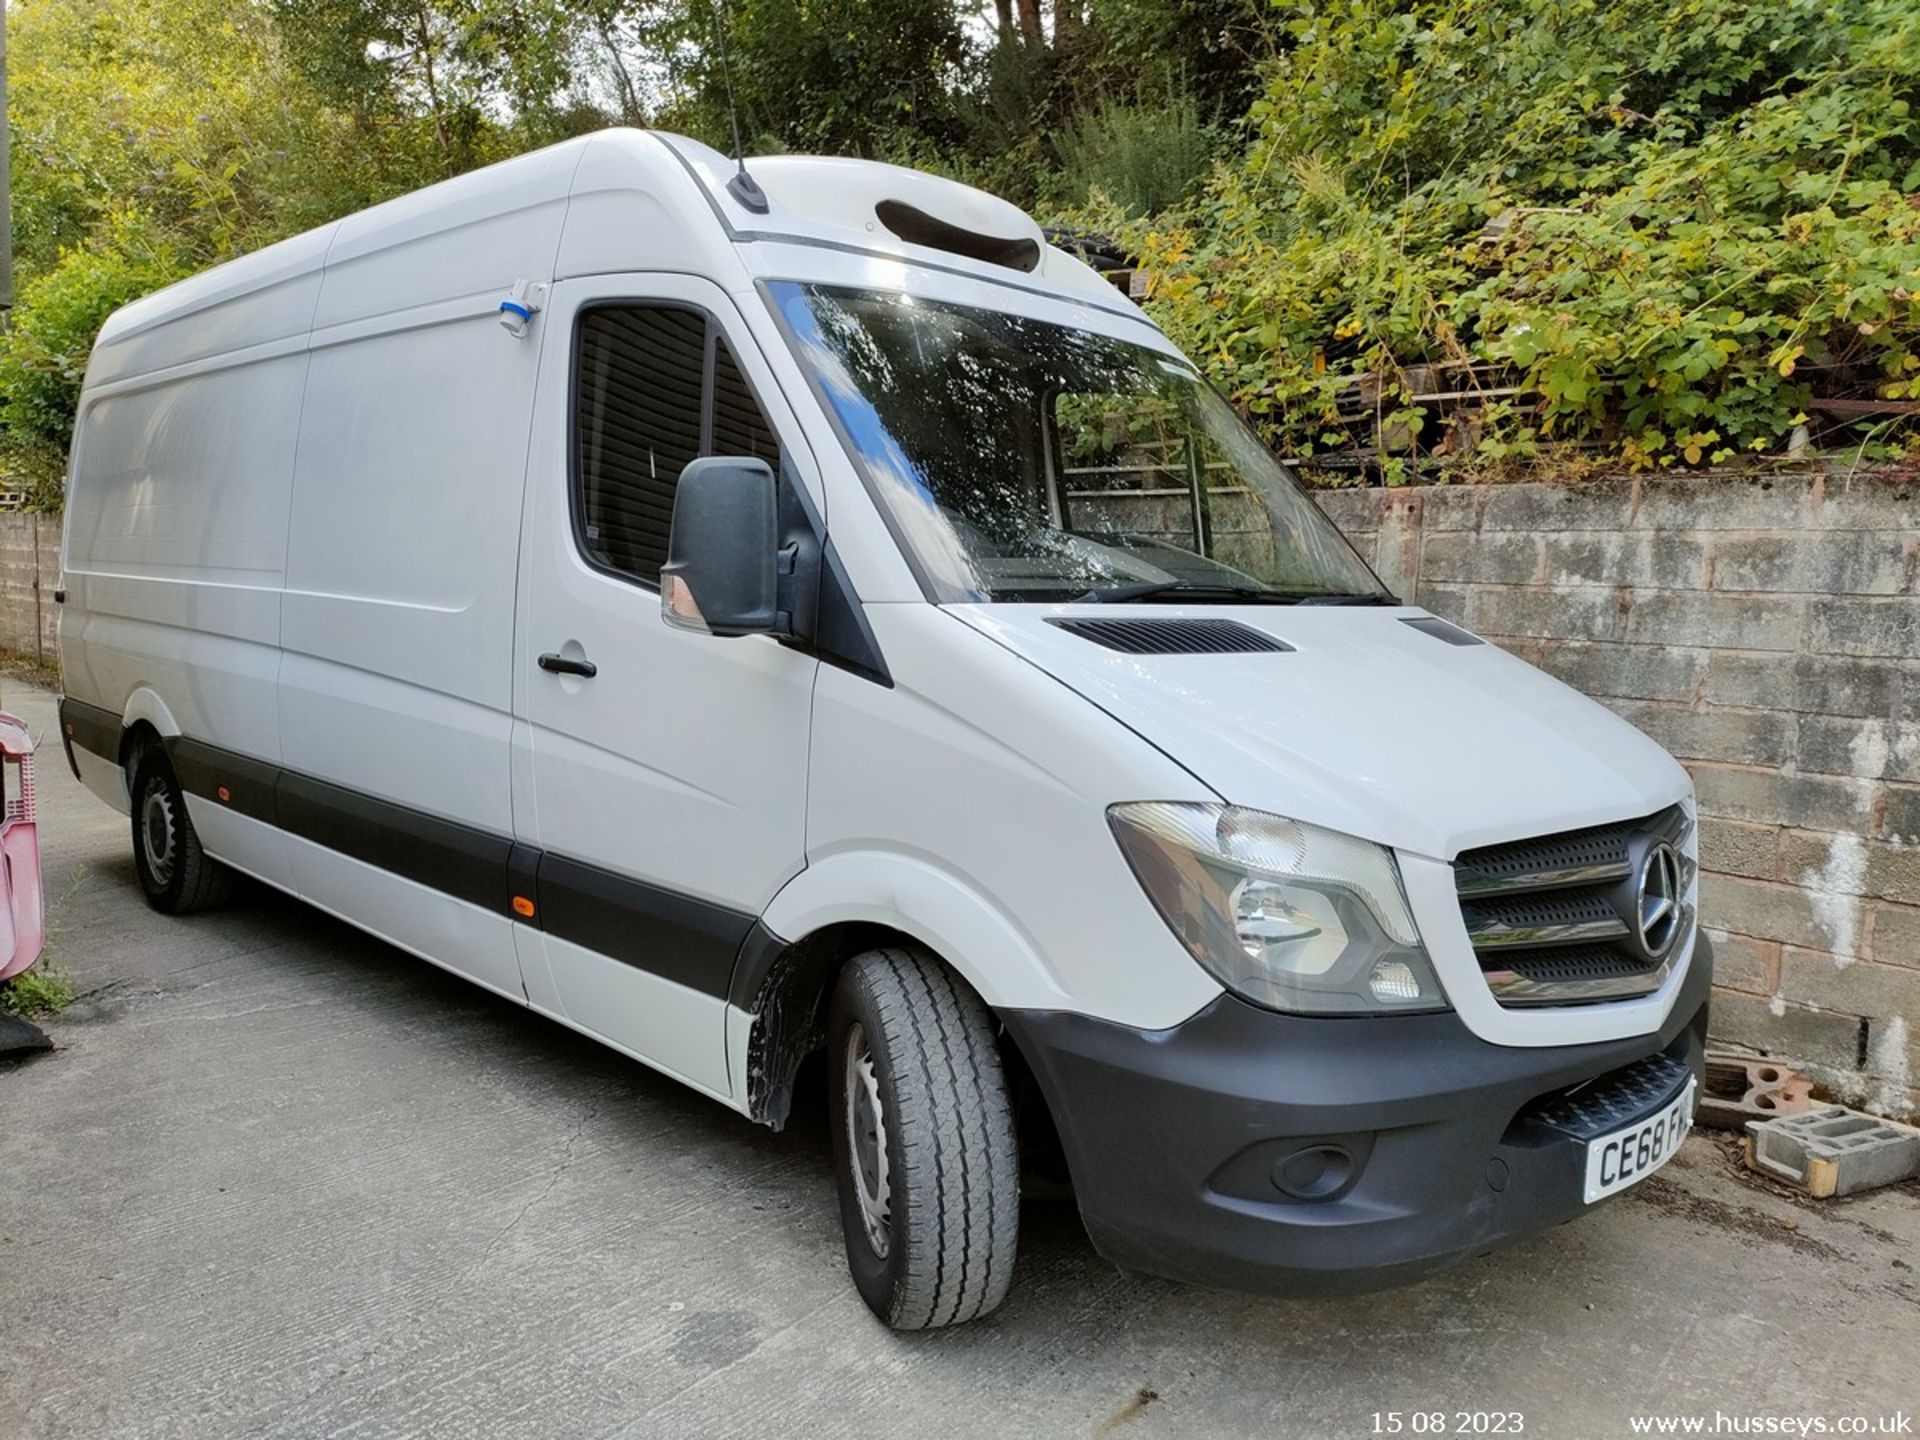 18/68 MERCEDES-BENZ SPRINTER 314CDI - 2143cc 5dr Refrigerated (White) - Image 16 of 40